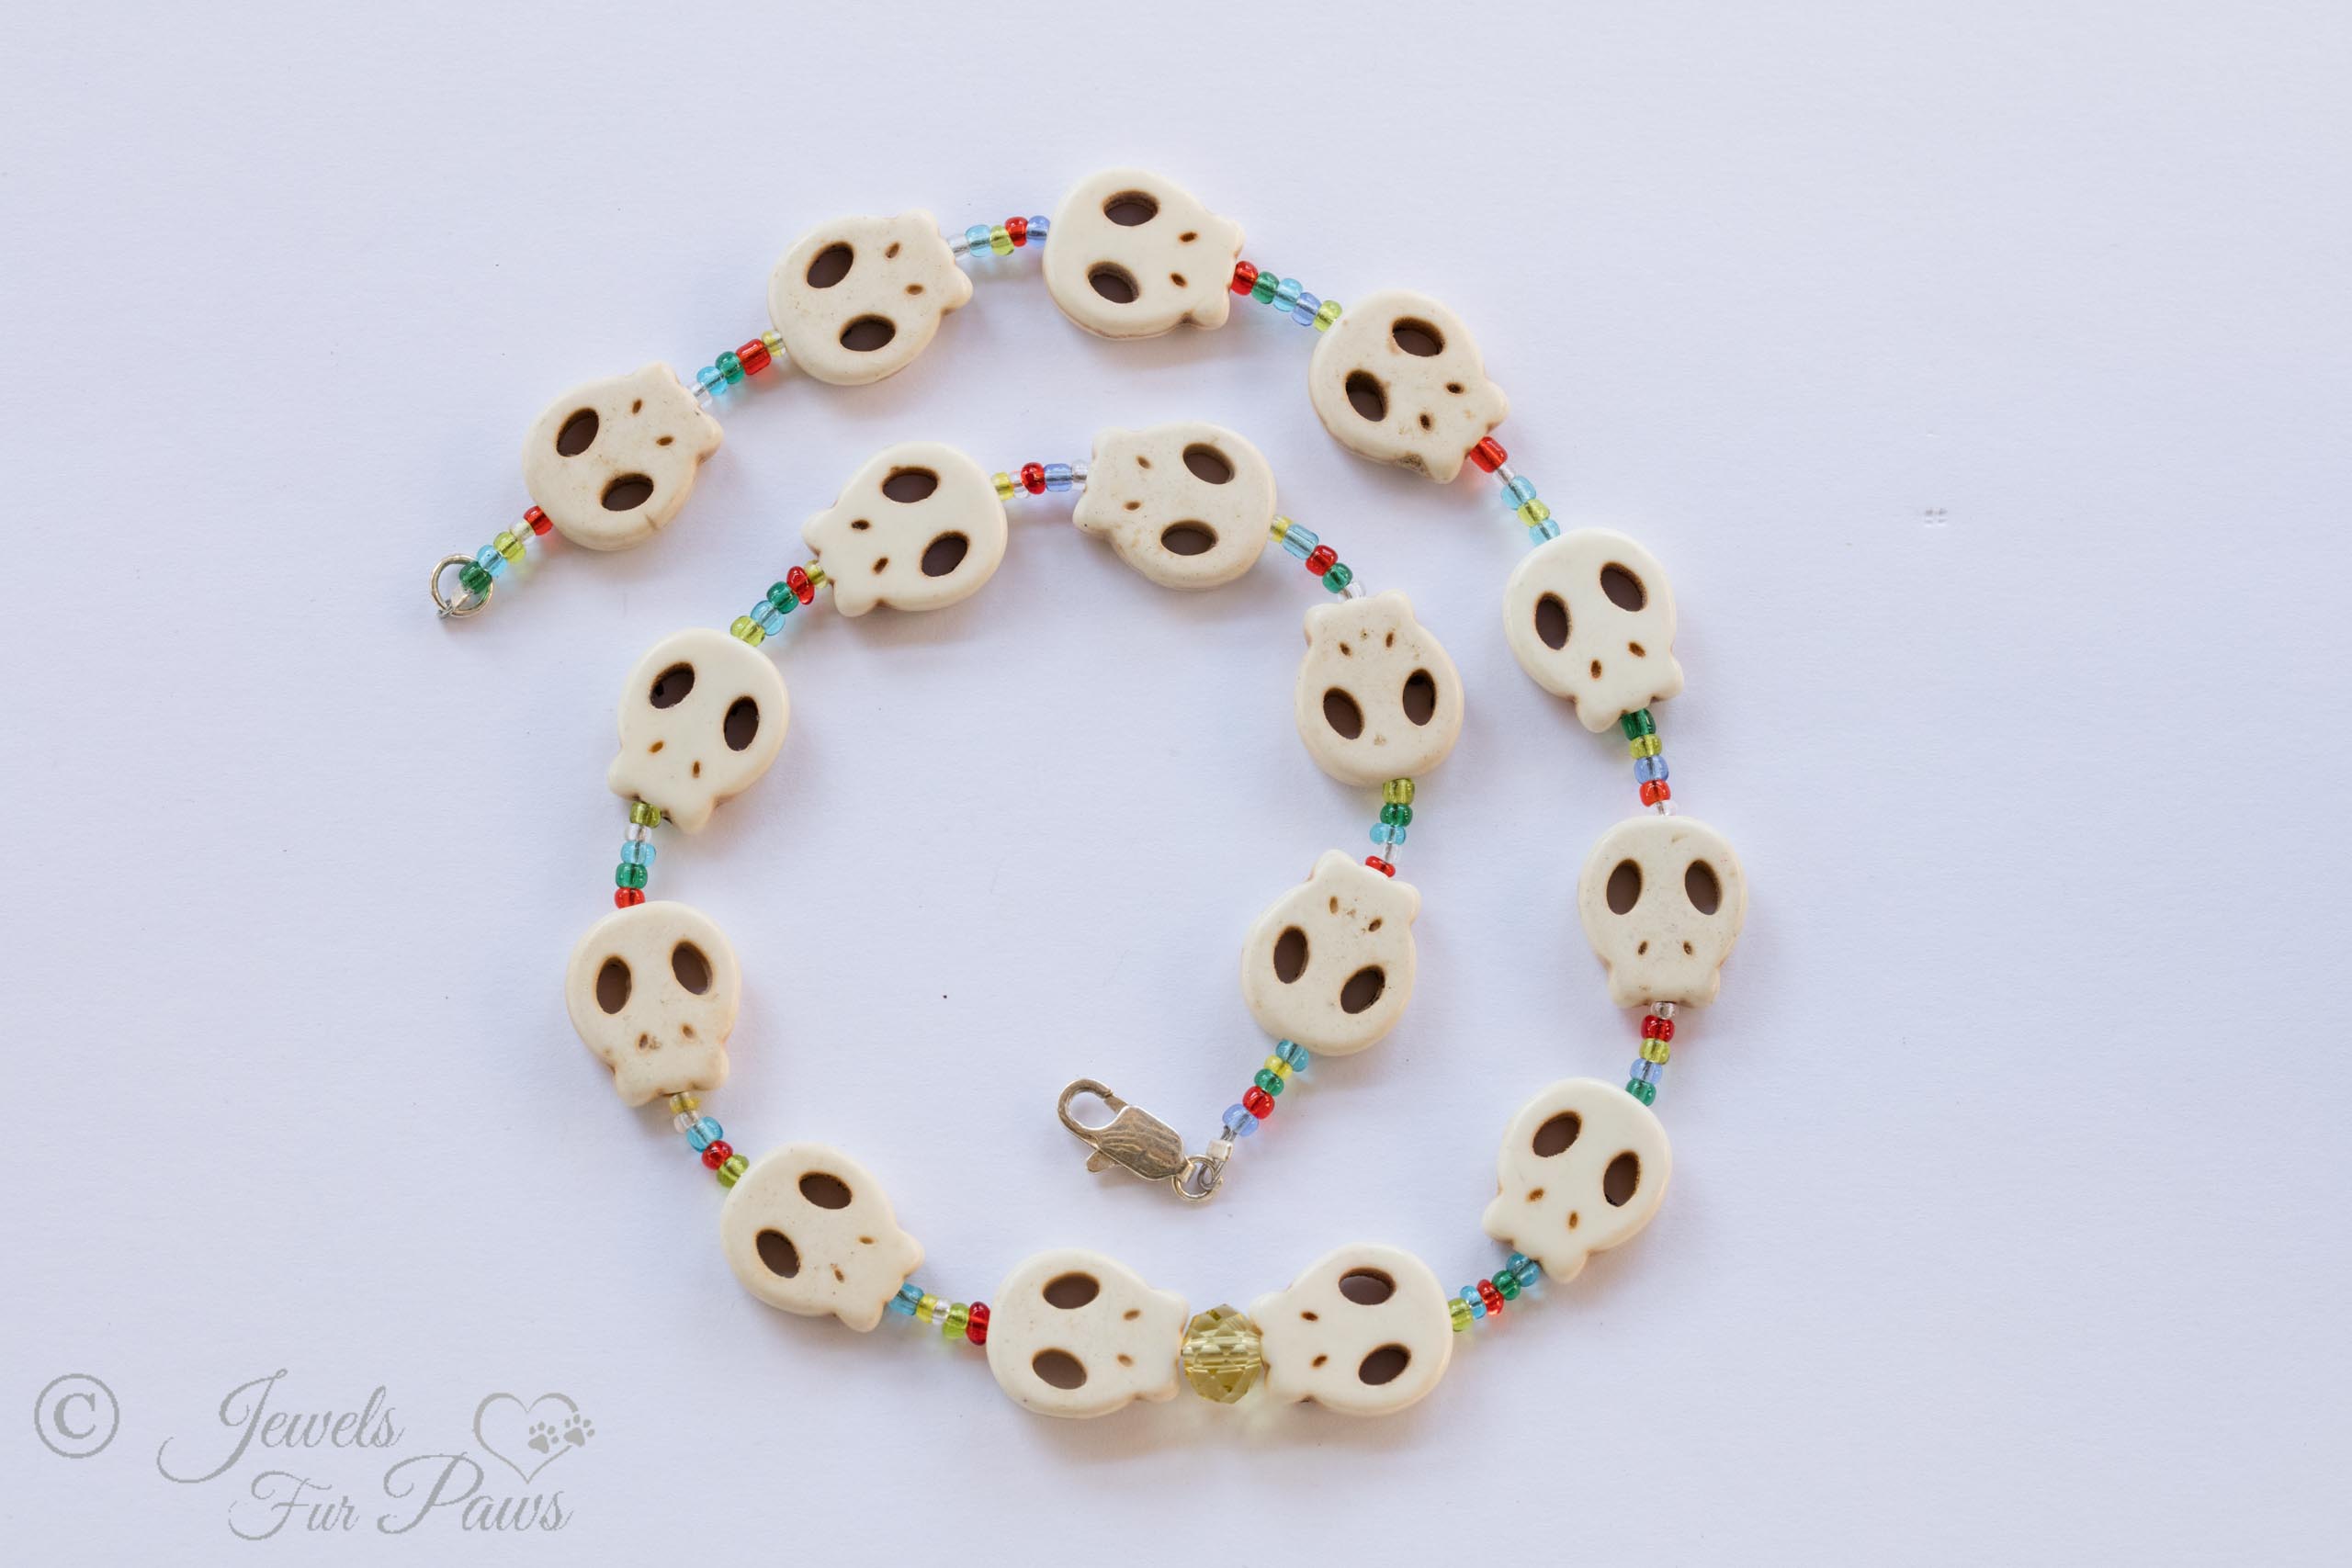 dog cat pet necklaces jewelry, off-white skull shaped beads with different colored spacers and an amber Czech crystal in the middle for on a white background